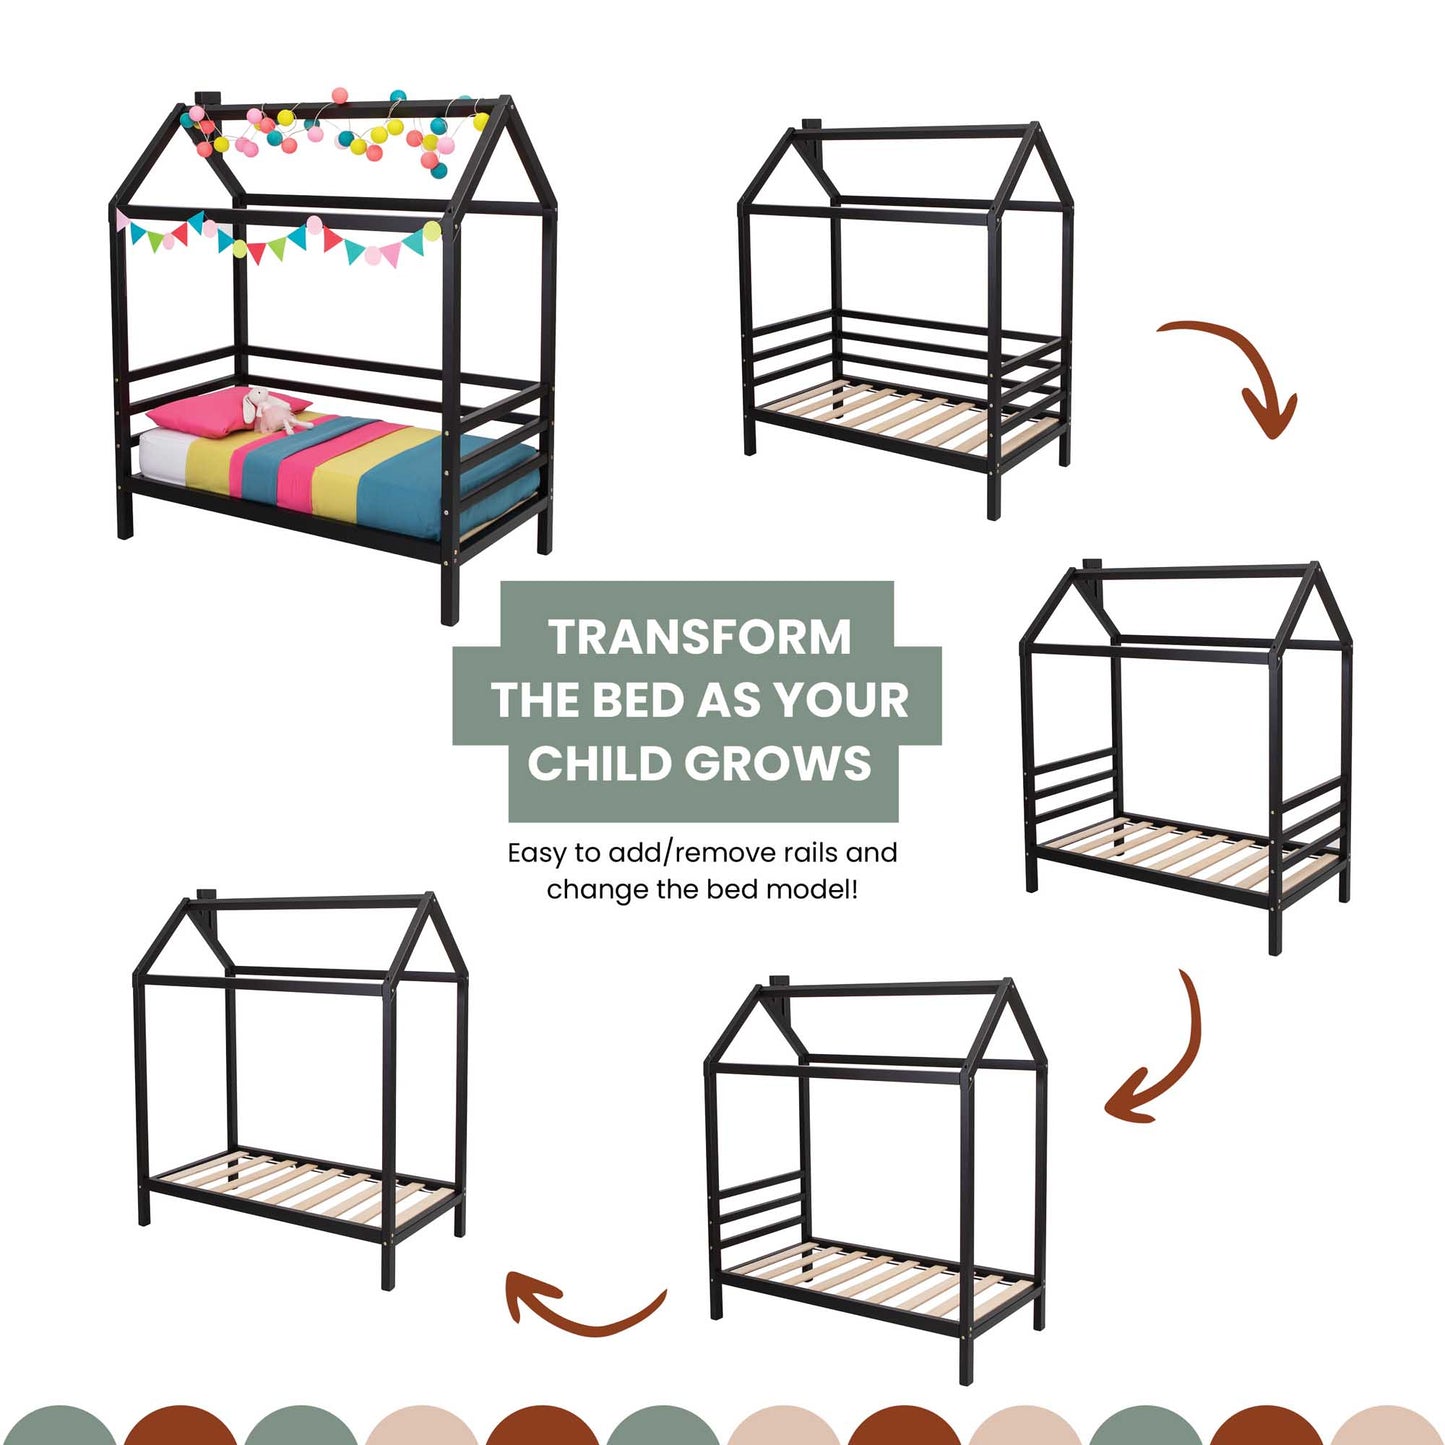 Elevate the bed as your child grows with a versatile Children's house bed on legs with 3-sided rails.